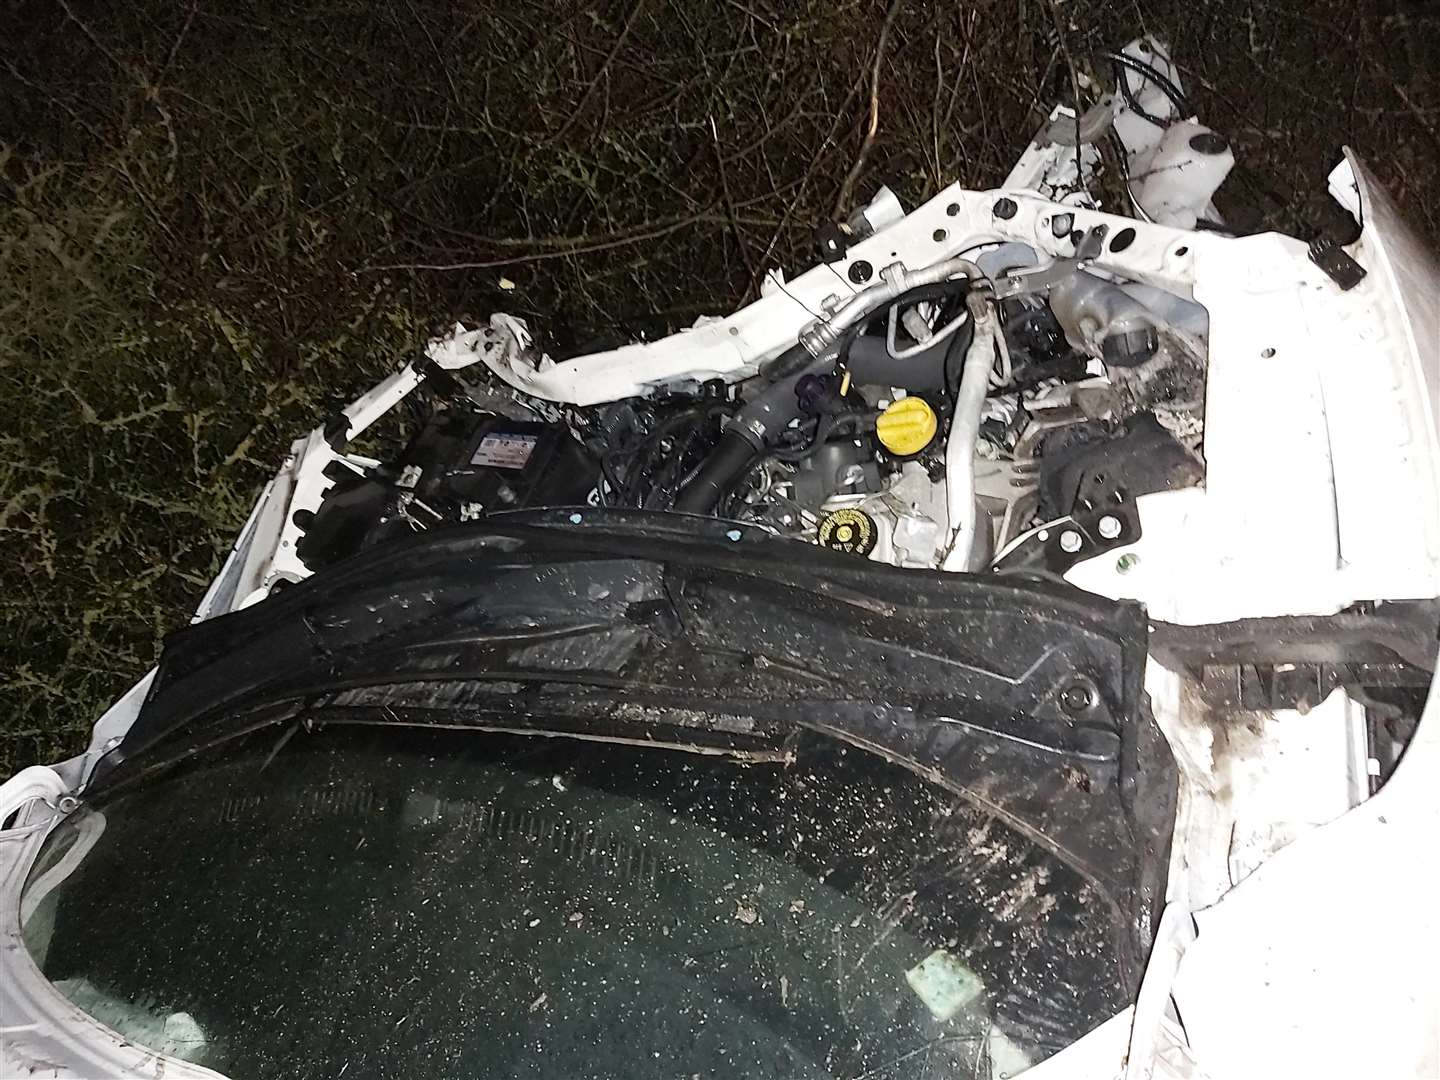 Hakeem Lewis-Harrison, of Rainbow Road, Erith has been jailed after crashing his Nissan car into trees before fleeing the scene in Grays, Essex leaving behind two women in the burning wreckage. Picture: Essex Police